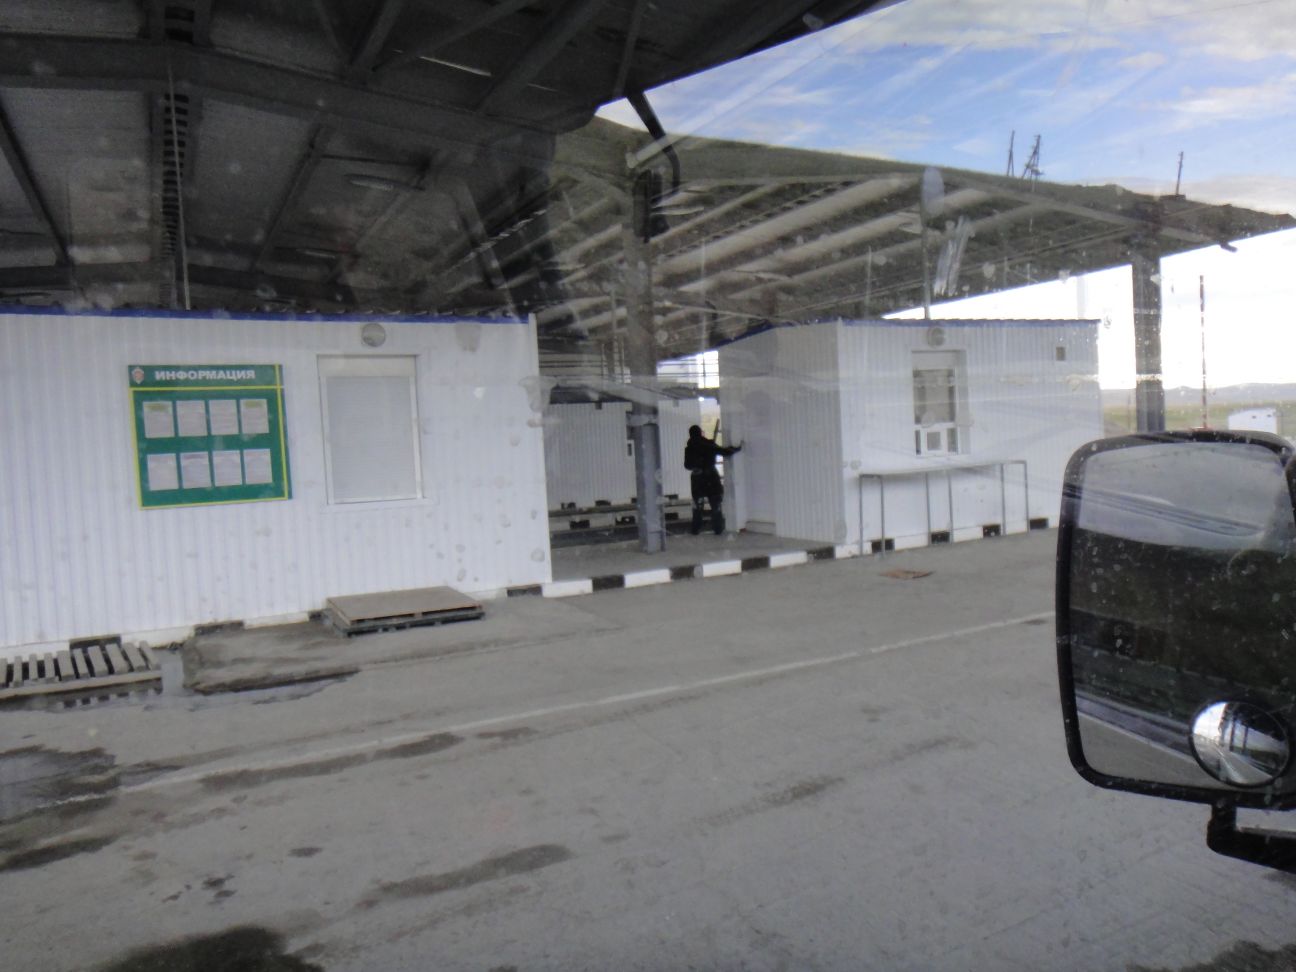 the undercover area with passport control (left)and customs offices (right) visible 